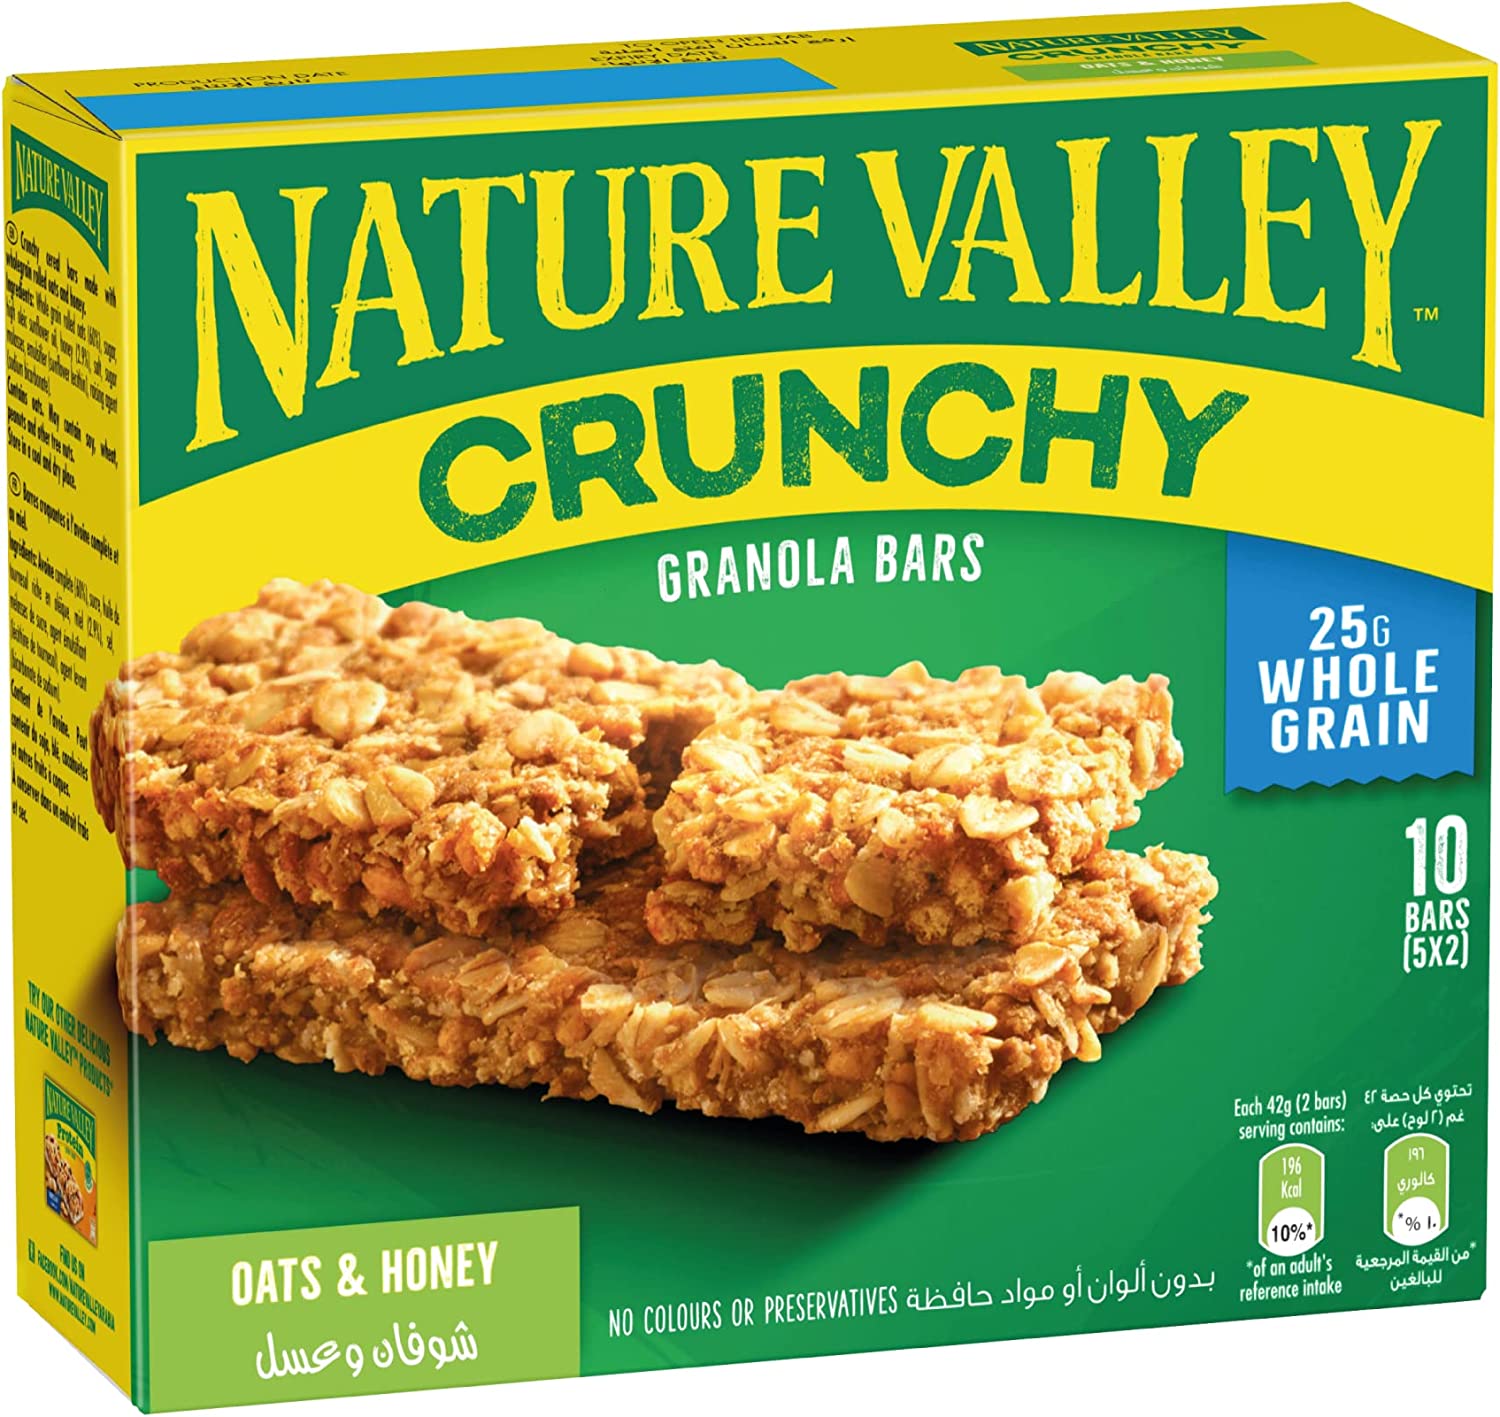 Nature Valley Crunchy Oats and Honey 25gr  10 Bars (5x2)  